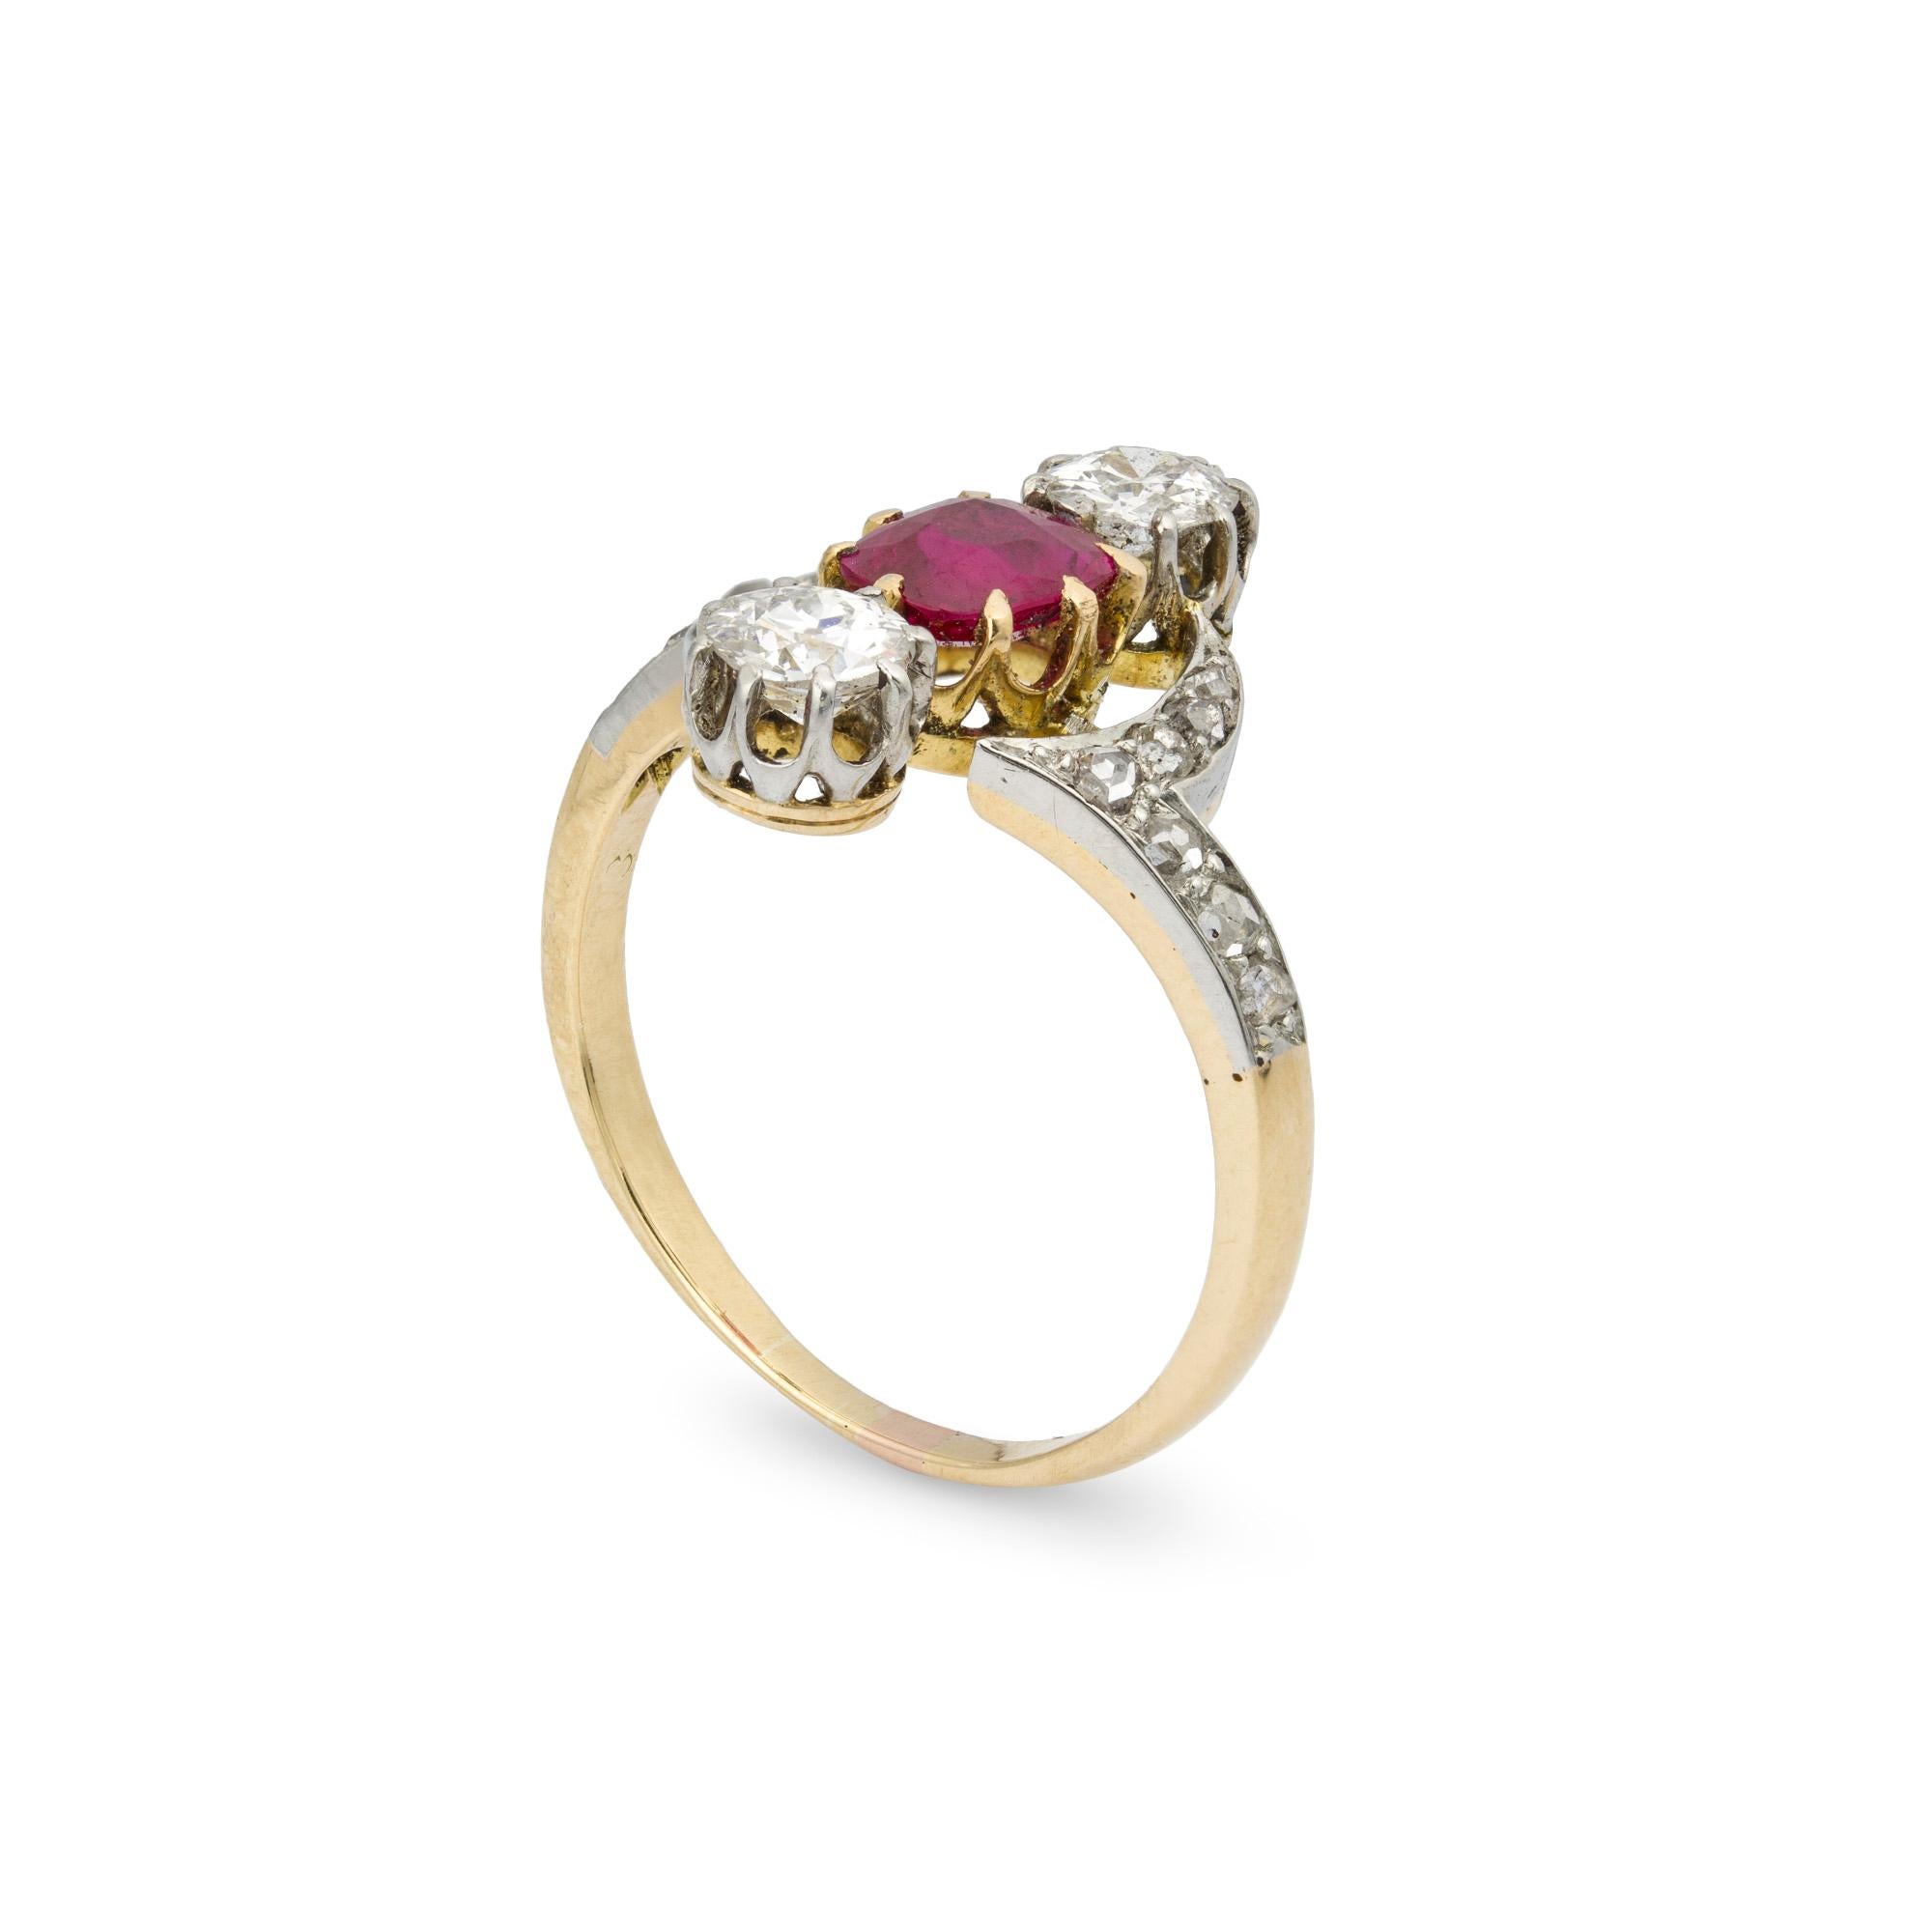 A late Victorian ruby and diamond ring, the central oval-cut ruby weighing 0.61cts with two old brilliant-cut diamonds to top and bottom, linked by diamond-encrusted crescent motifs and diamond-set shoulders, the diamonds estimated to weigh a total